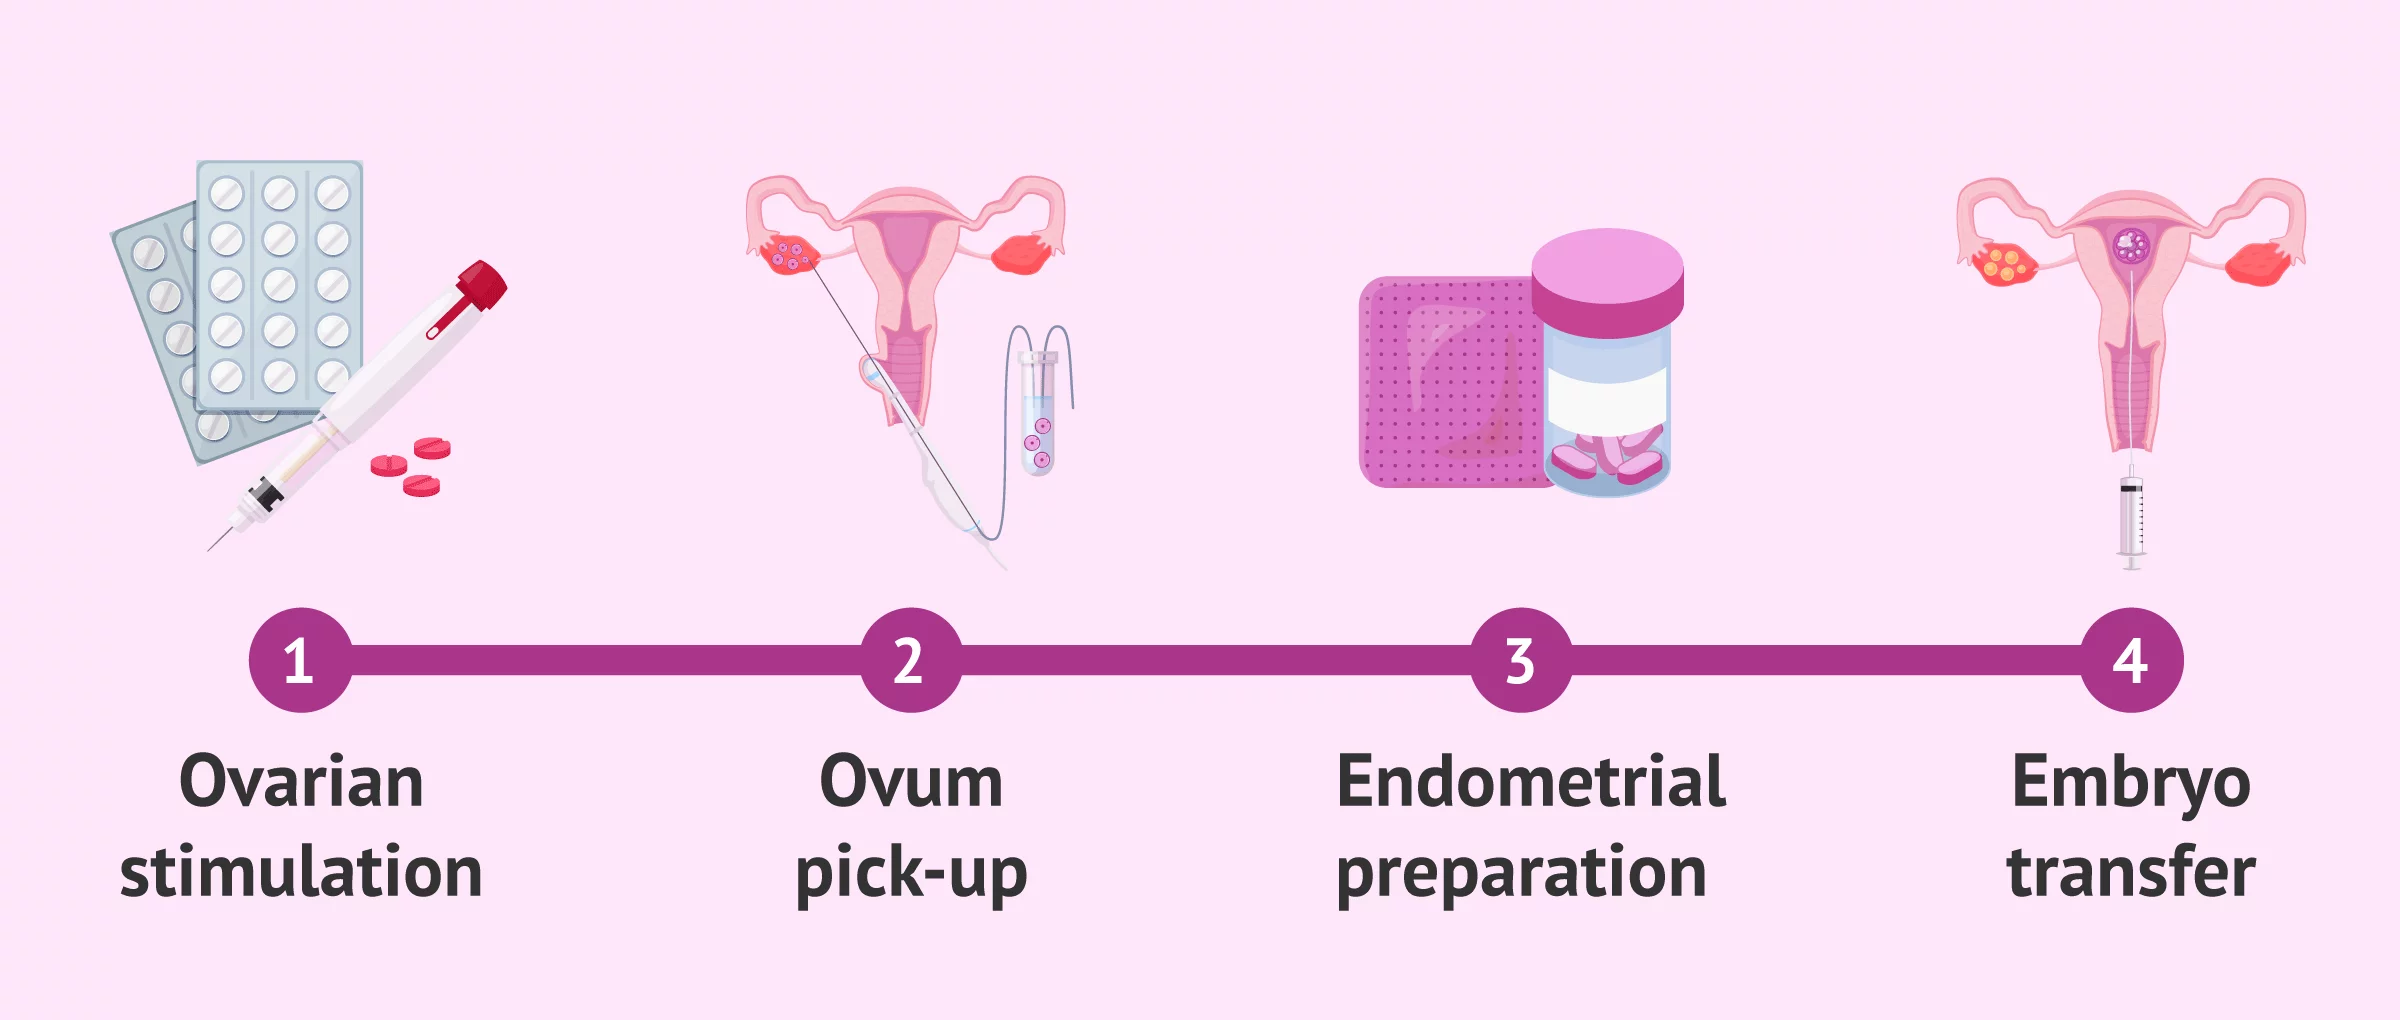 What are the most frequent symptoms after an embryo transfer?